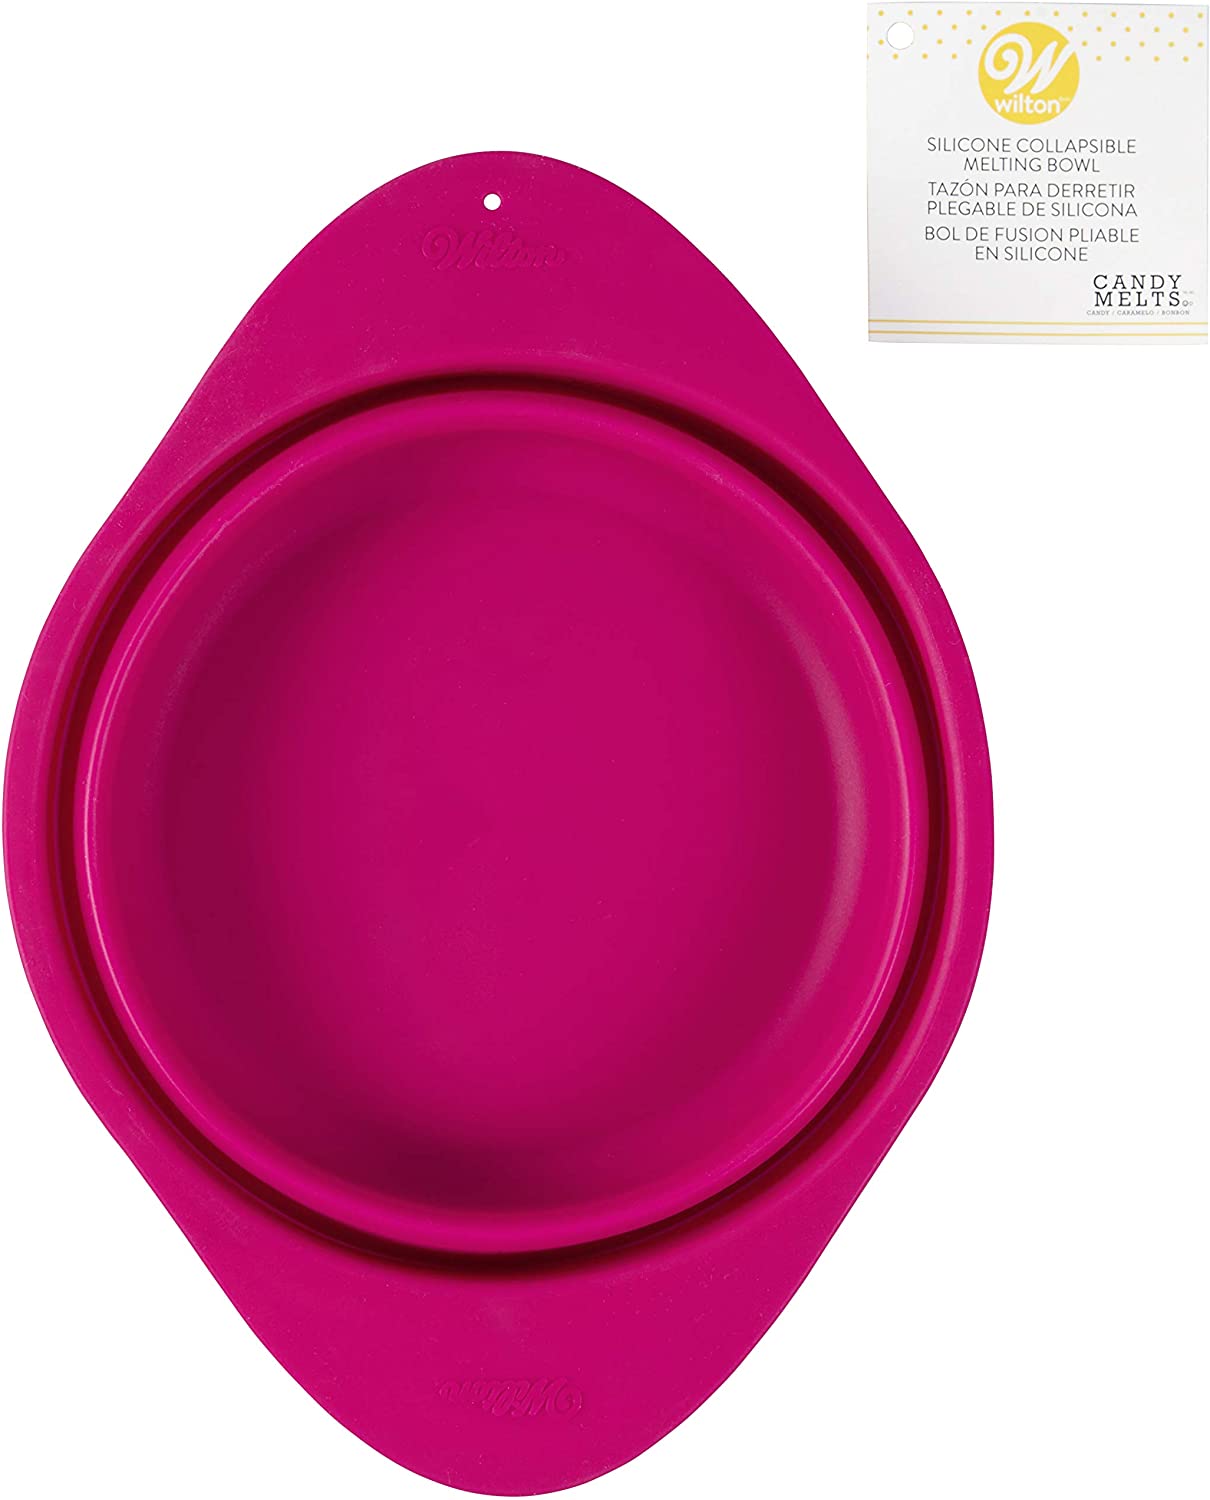 Wilton 1904-9315 Candy Collapsible Silicone Melting Bowl, Pink